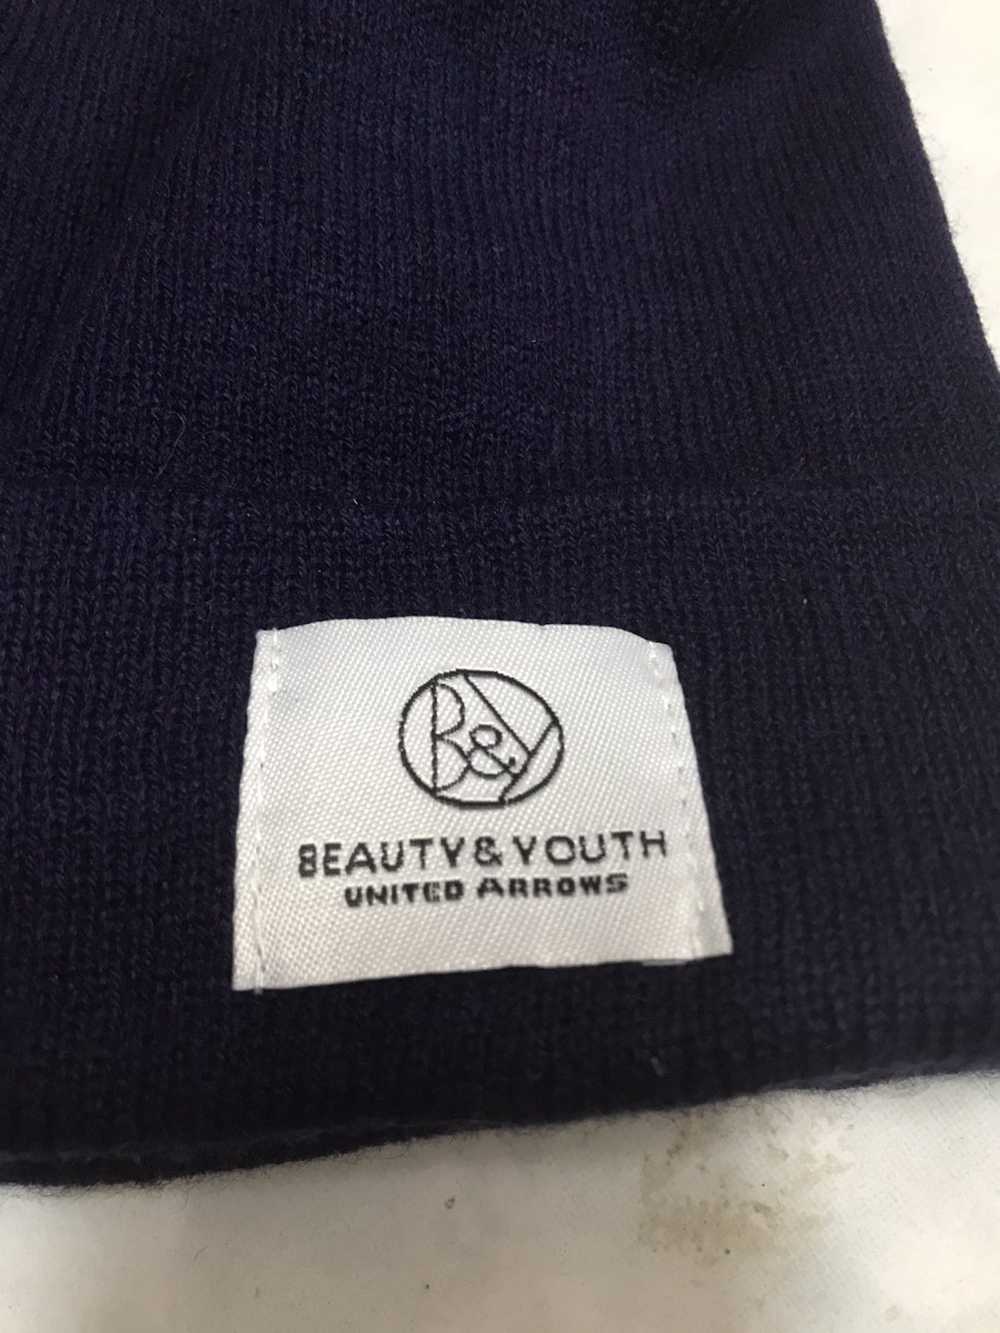 Beauty & Youth × Hat × United Arrows Beauty & You… - image 5